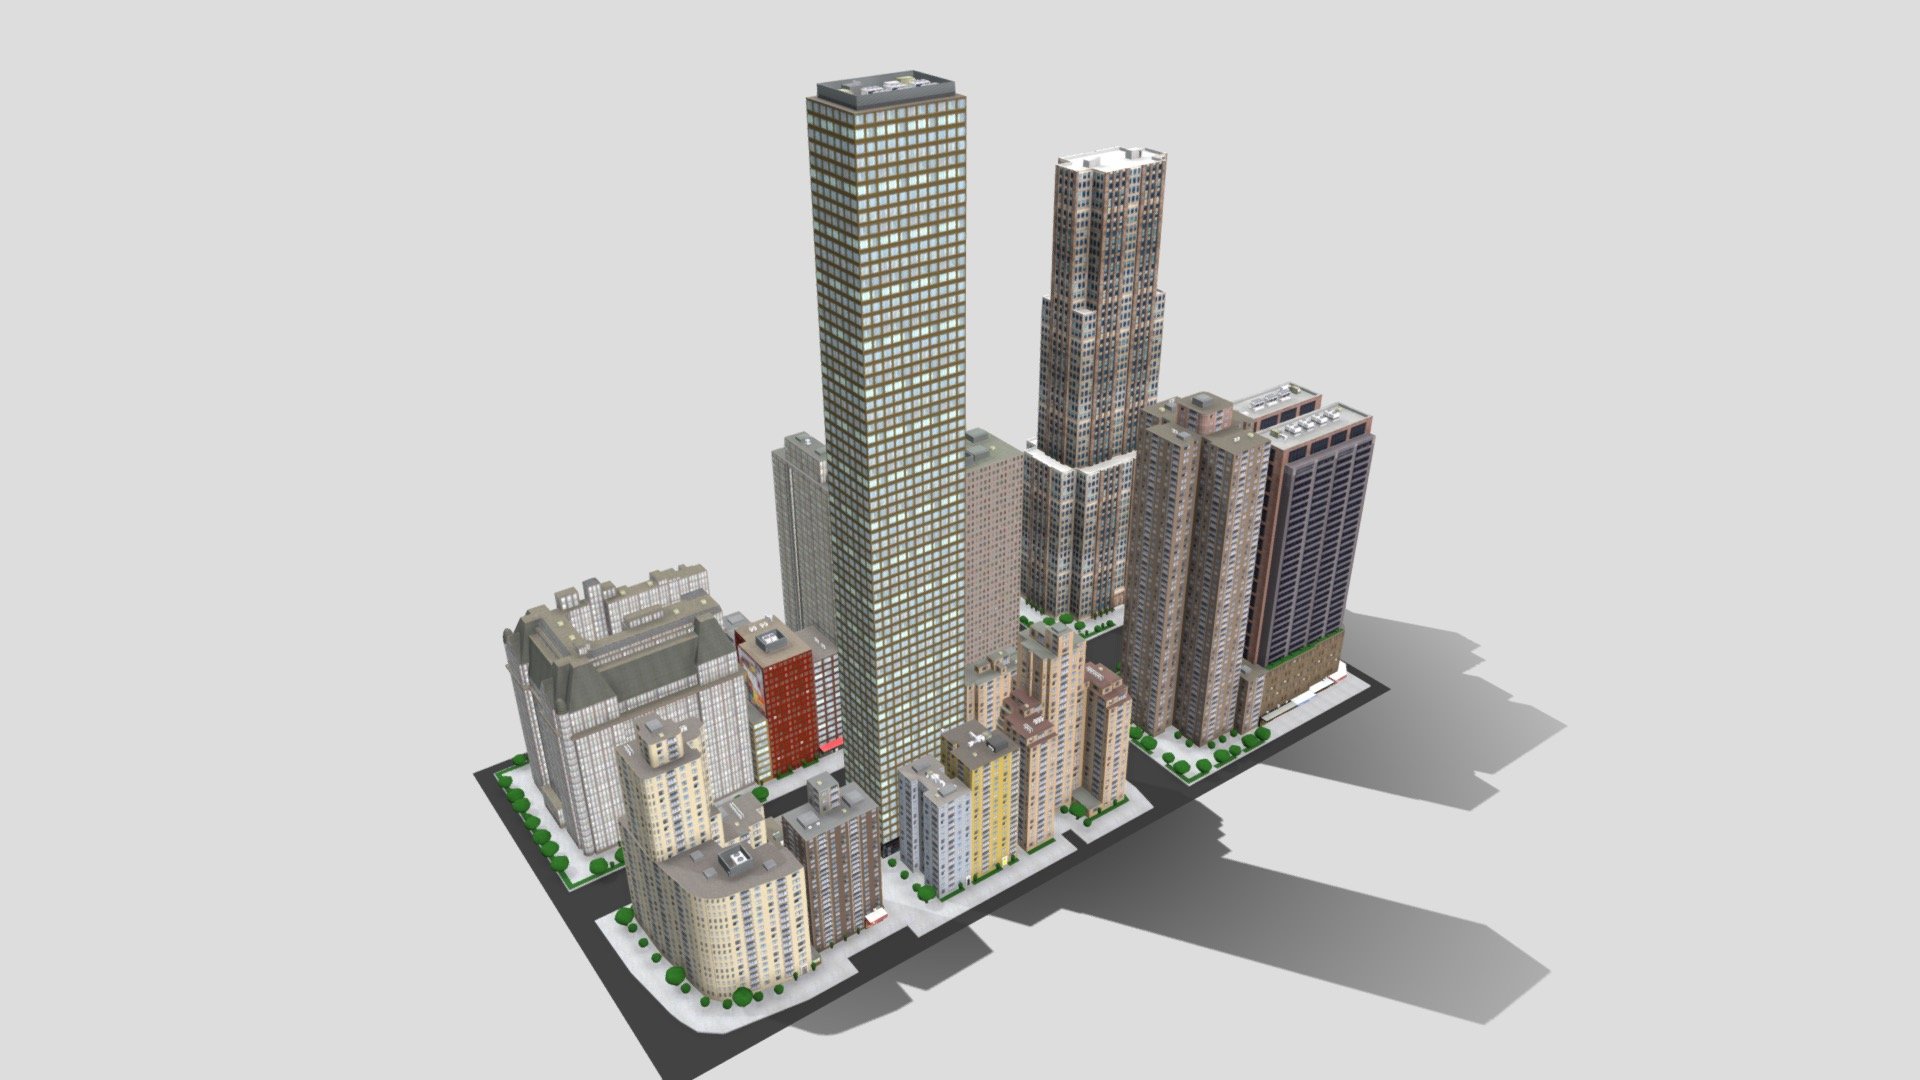 Low poly city block based on New York City ideal for game engines and VR.

Includes high-resolution color textures for Building facade, Shop-fronts, Trees, Footpath, and Roof air conditioning plant 3d model